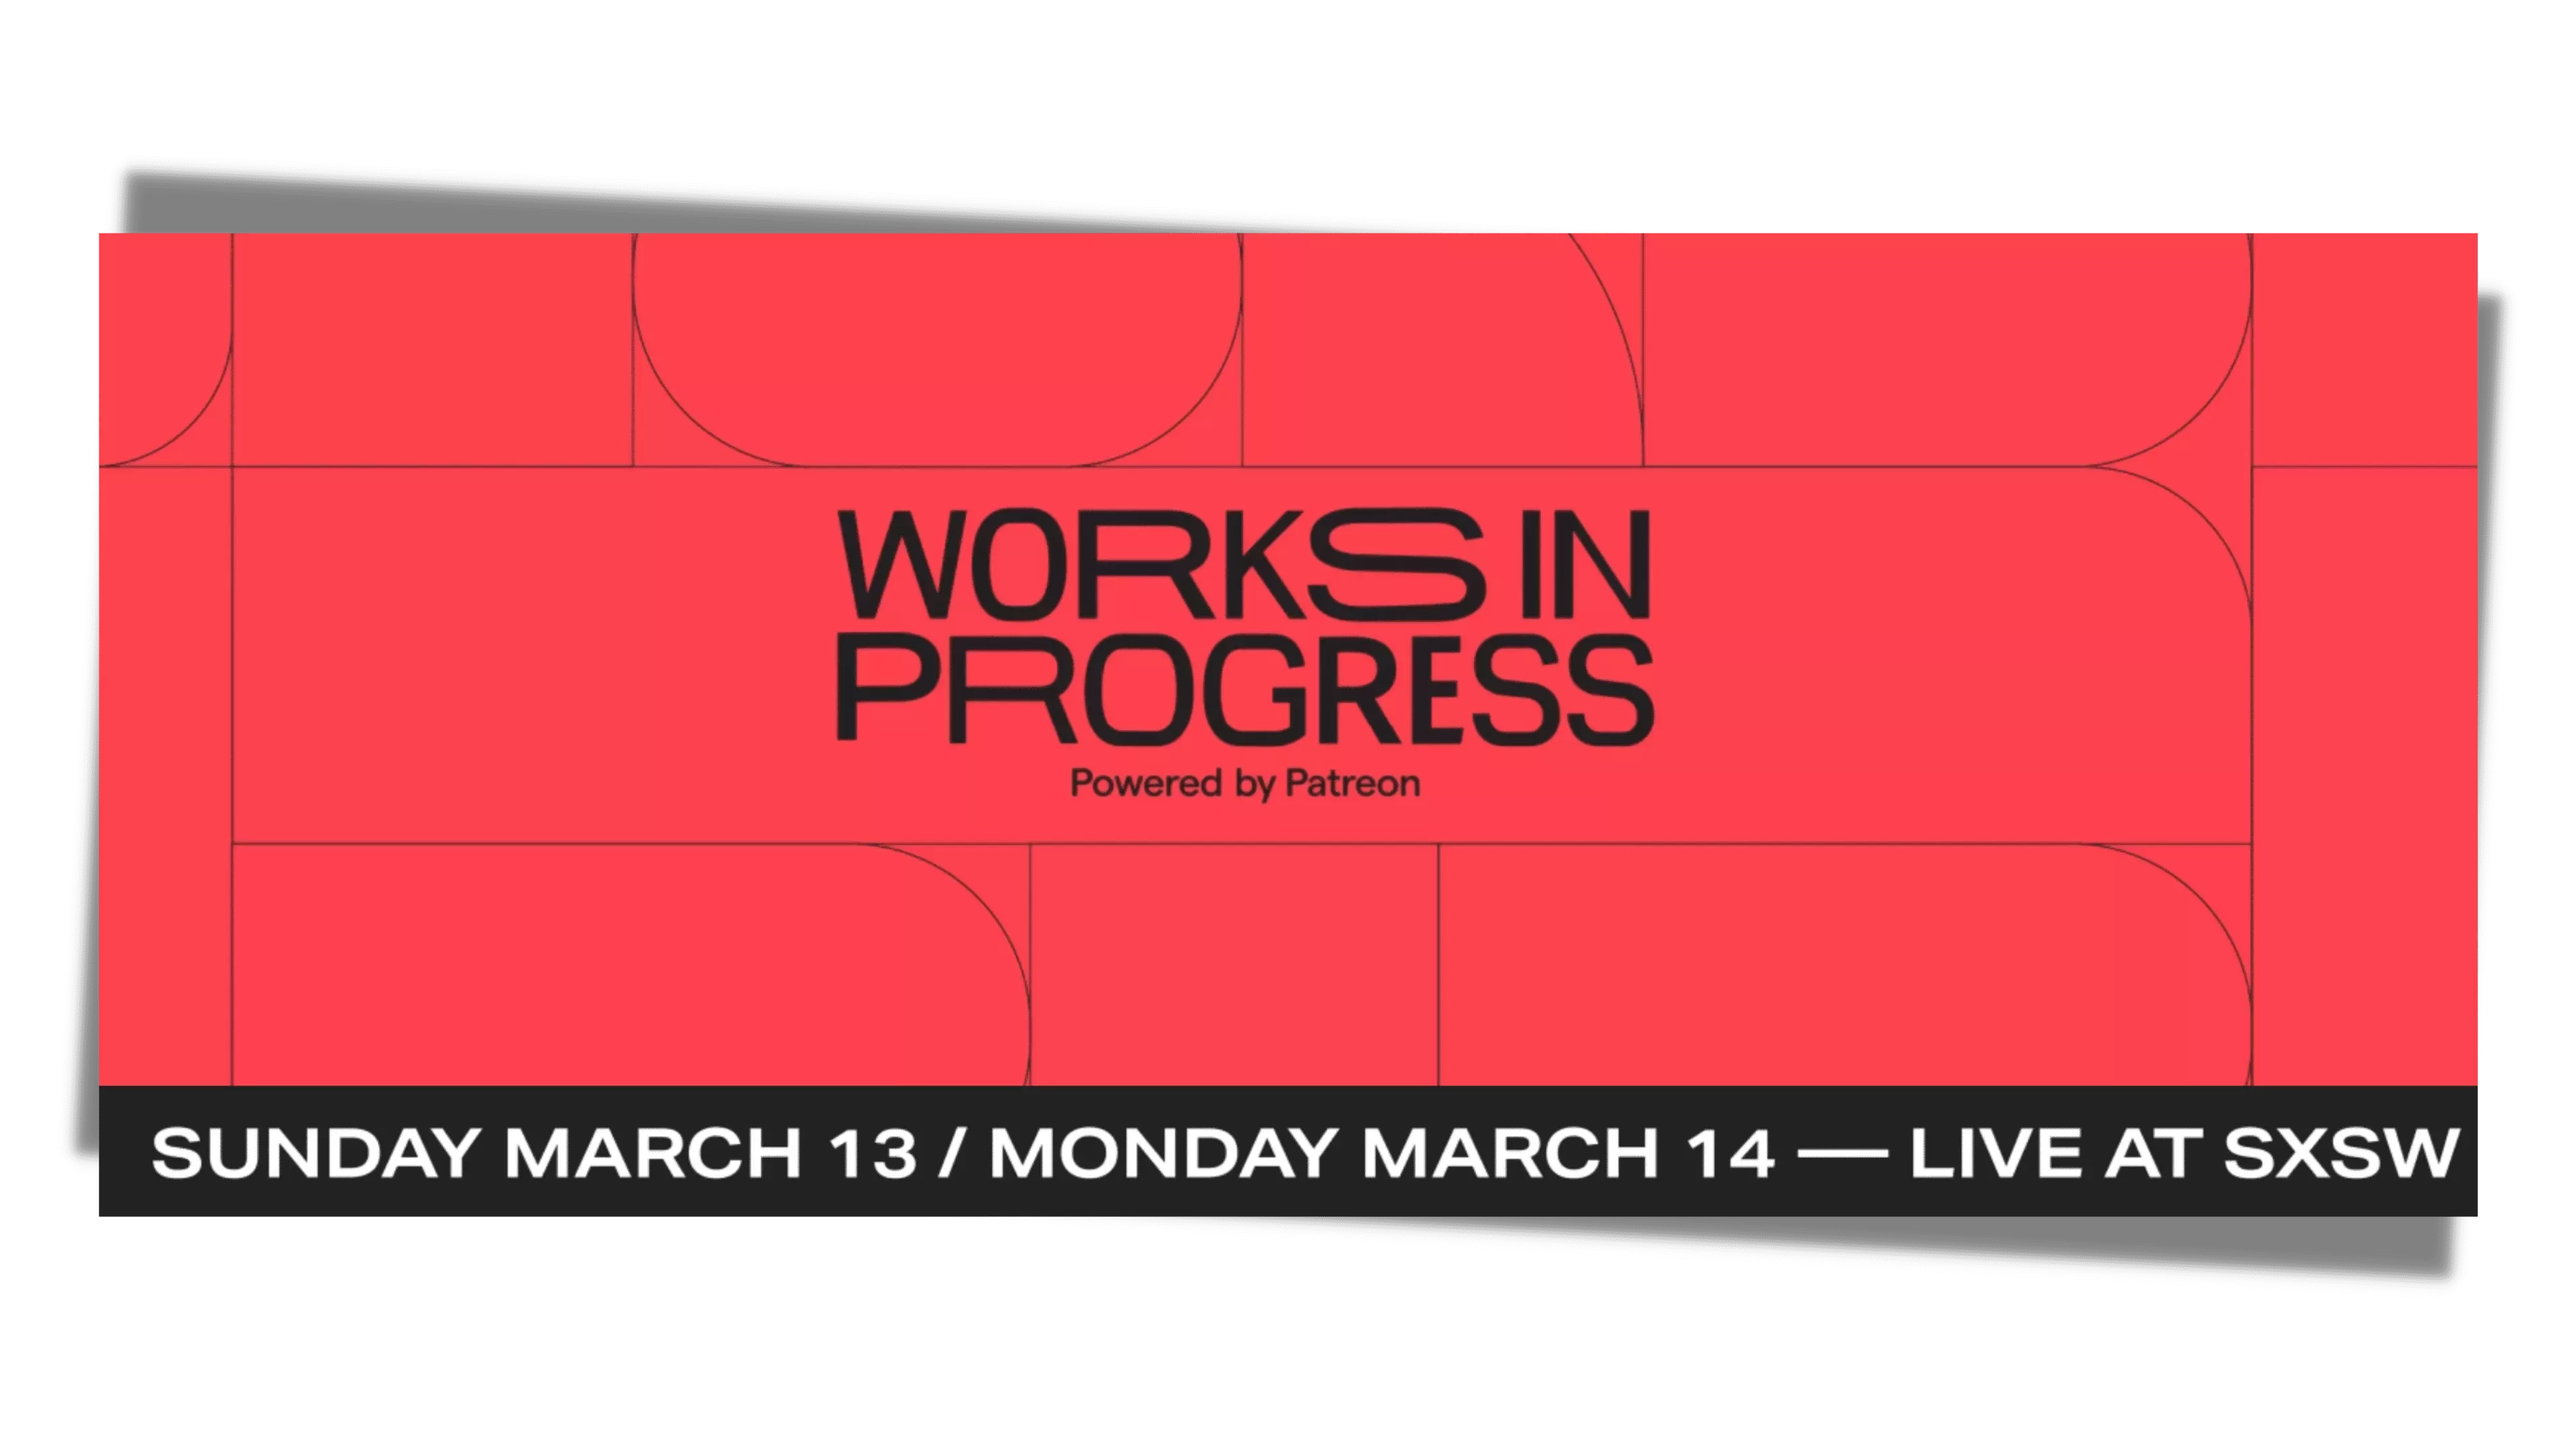 Patreon flyer that says "Works In Progress"